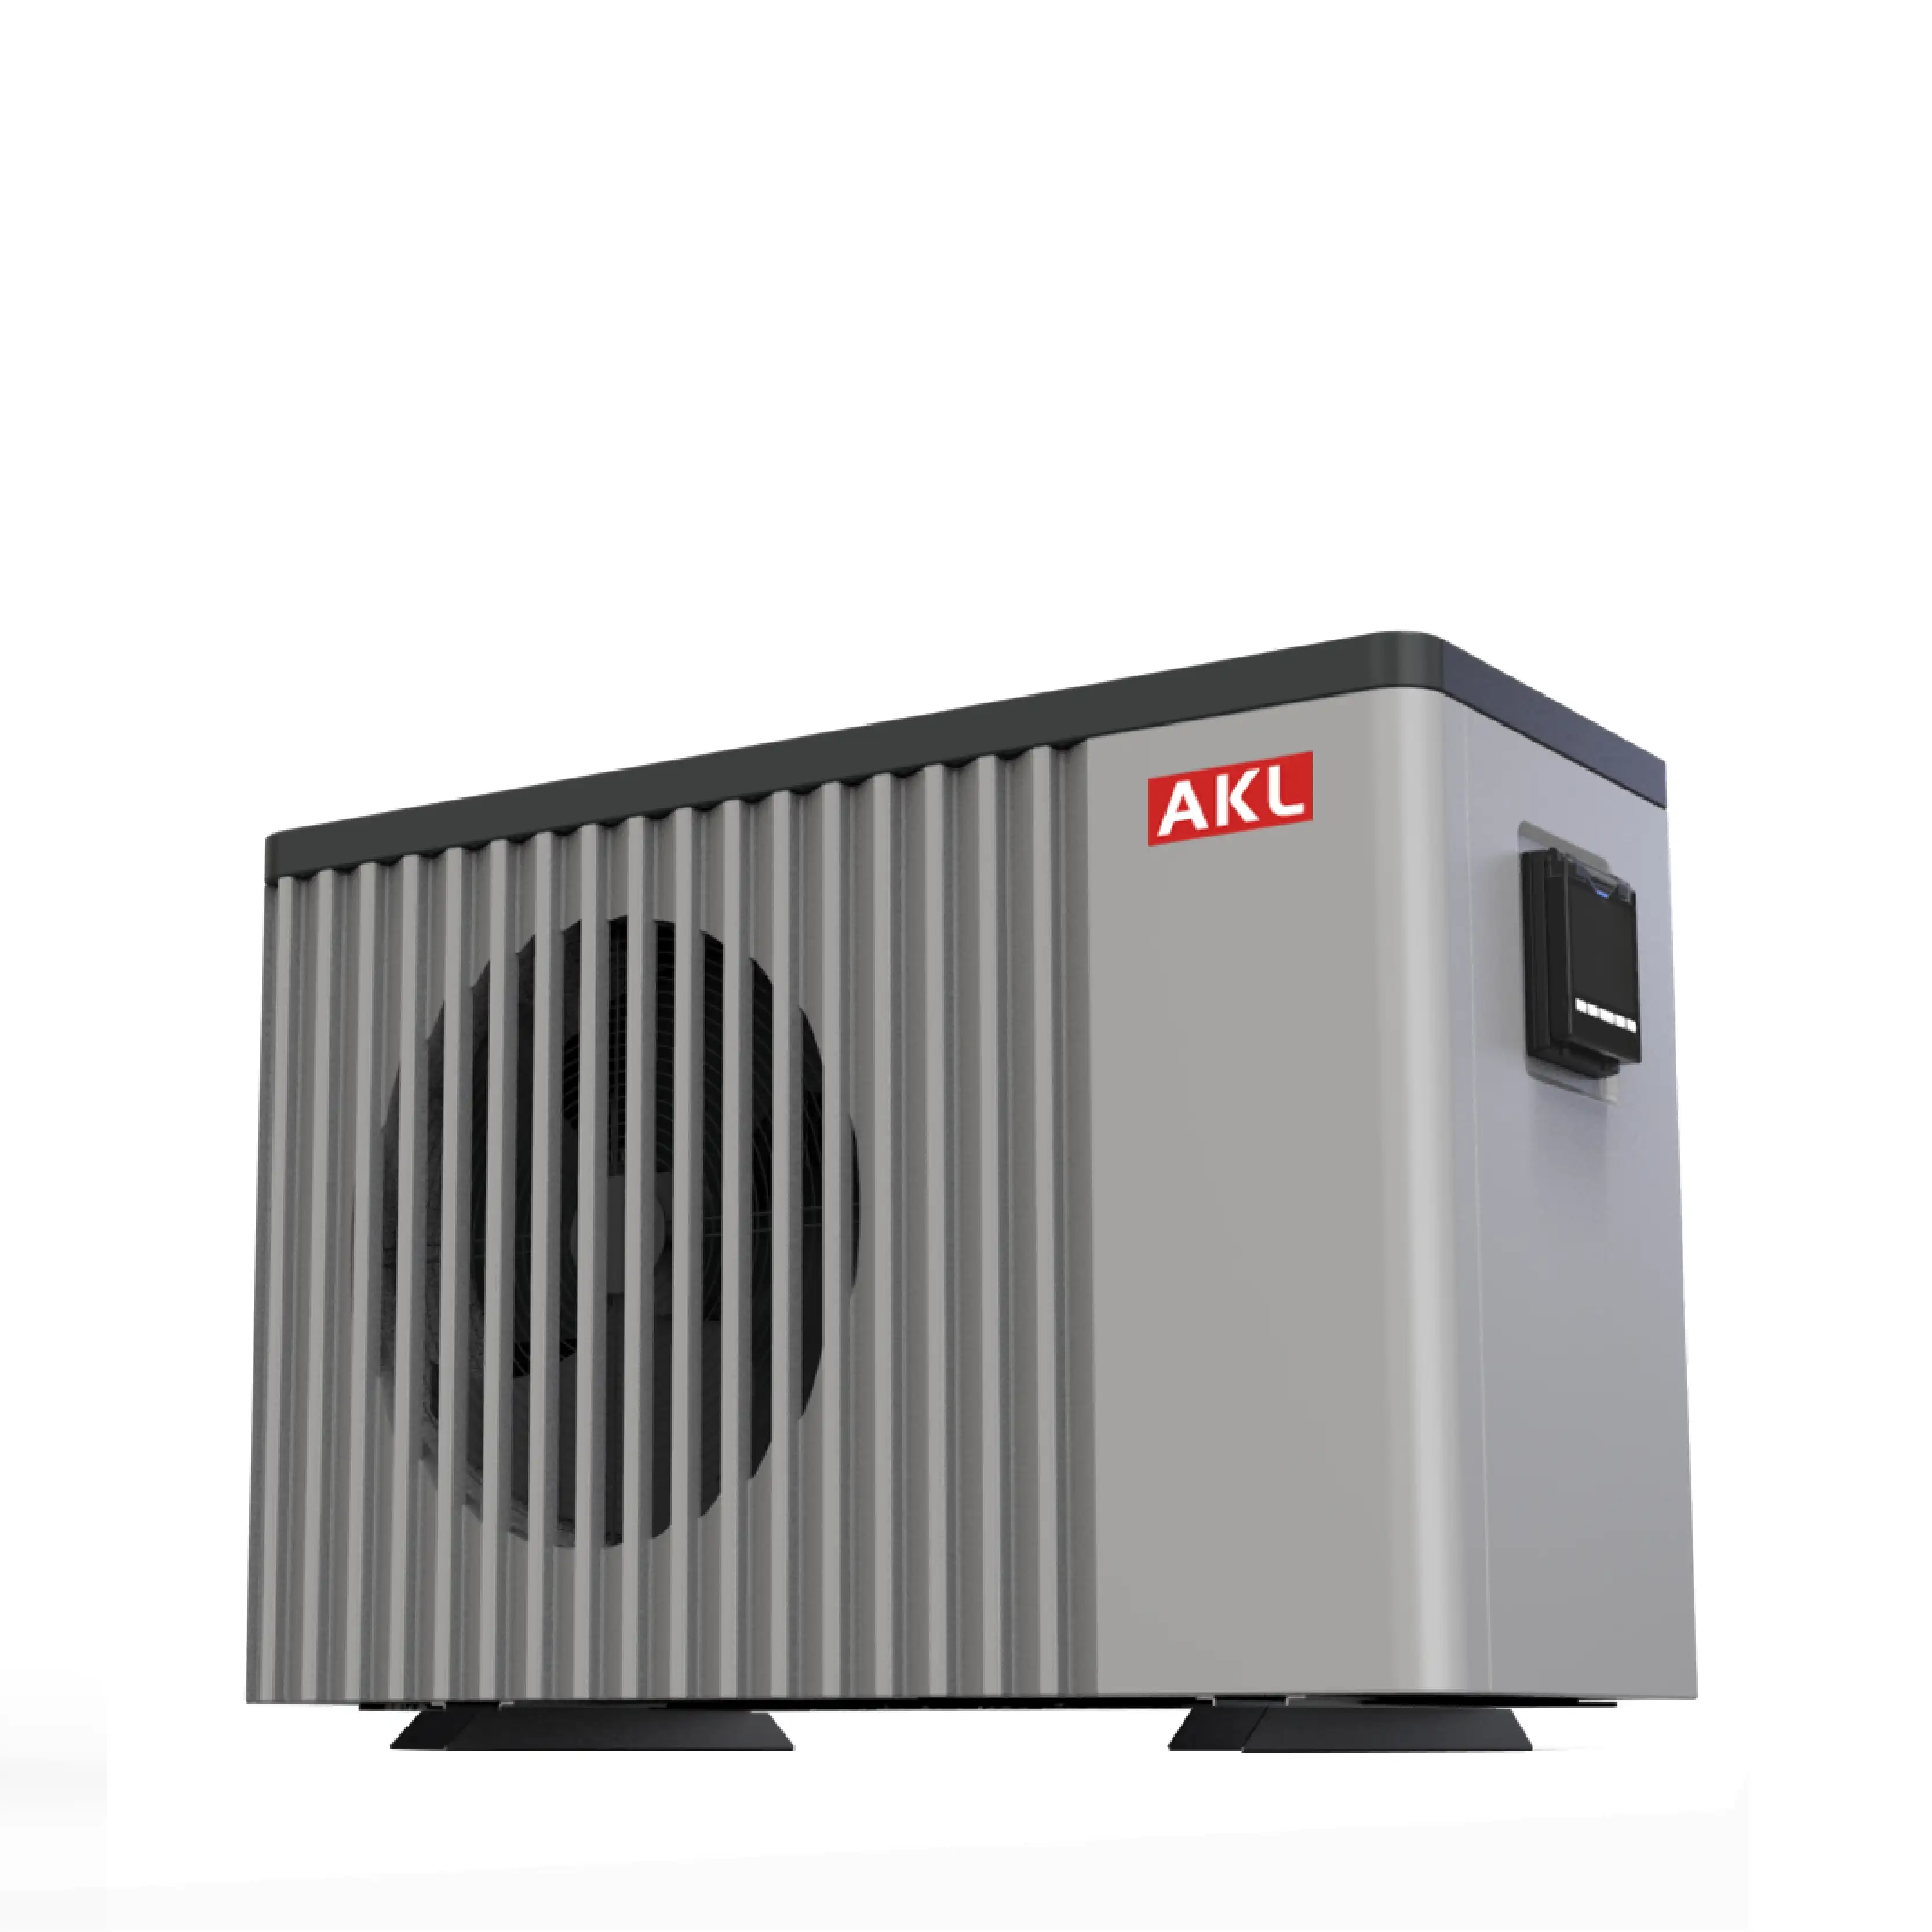 China AKL Europe R32 R410a Small WIFI Air Source DC Inverter Swimming Pool Heat Pump Air Water Spa Pool Heater Factory